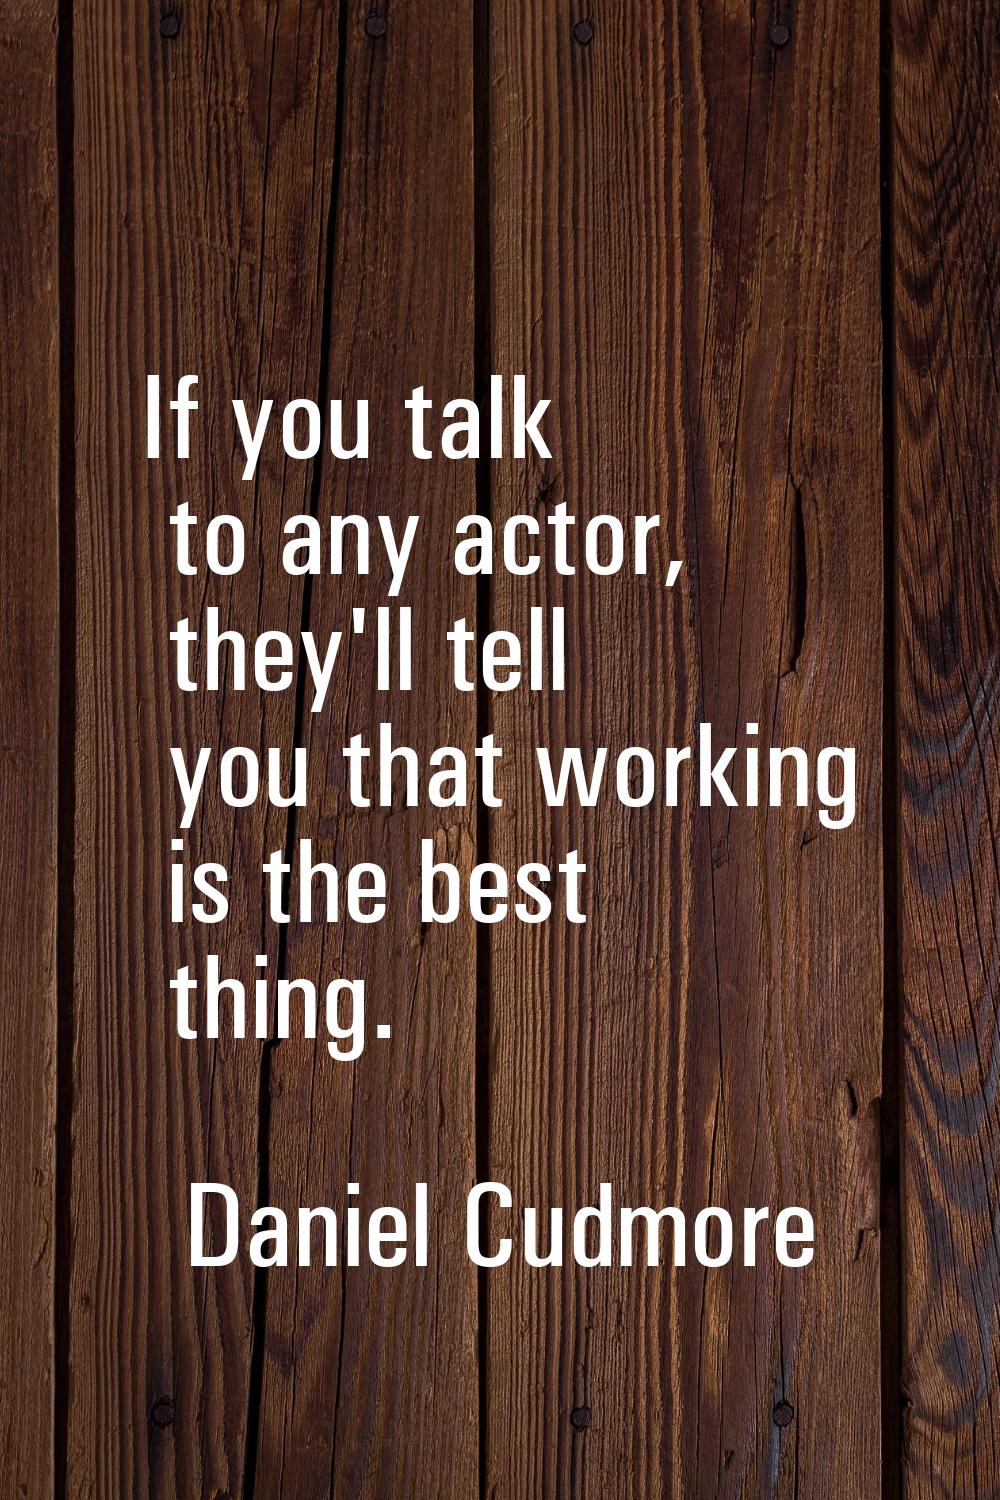 If you talk to any actor, they'll tell you that working is the best thing.